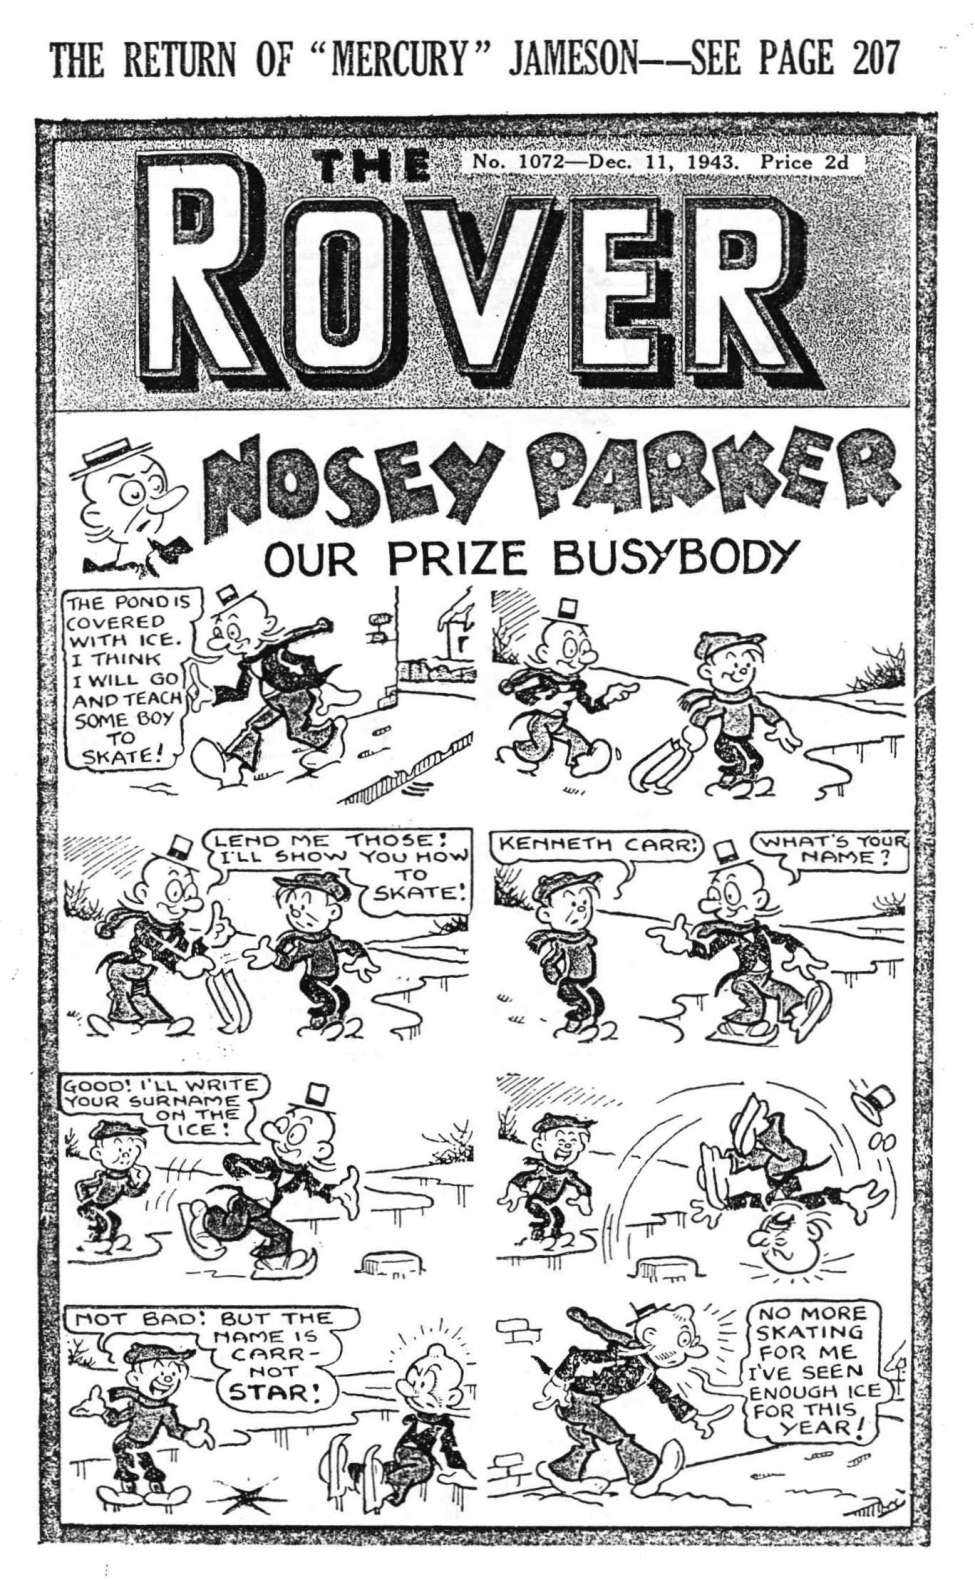 Book Cover For The Rover 1072